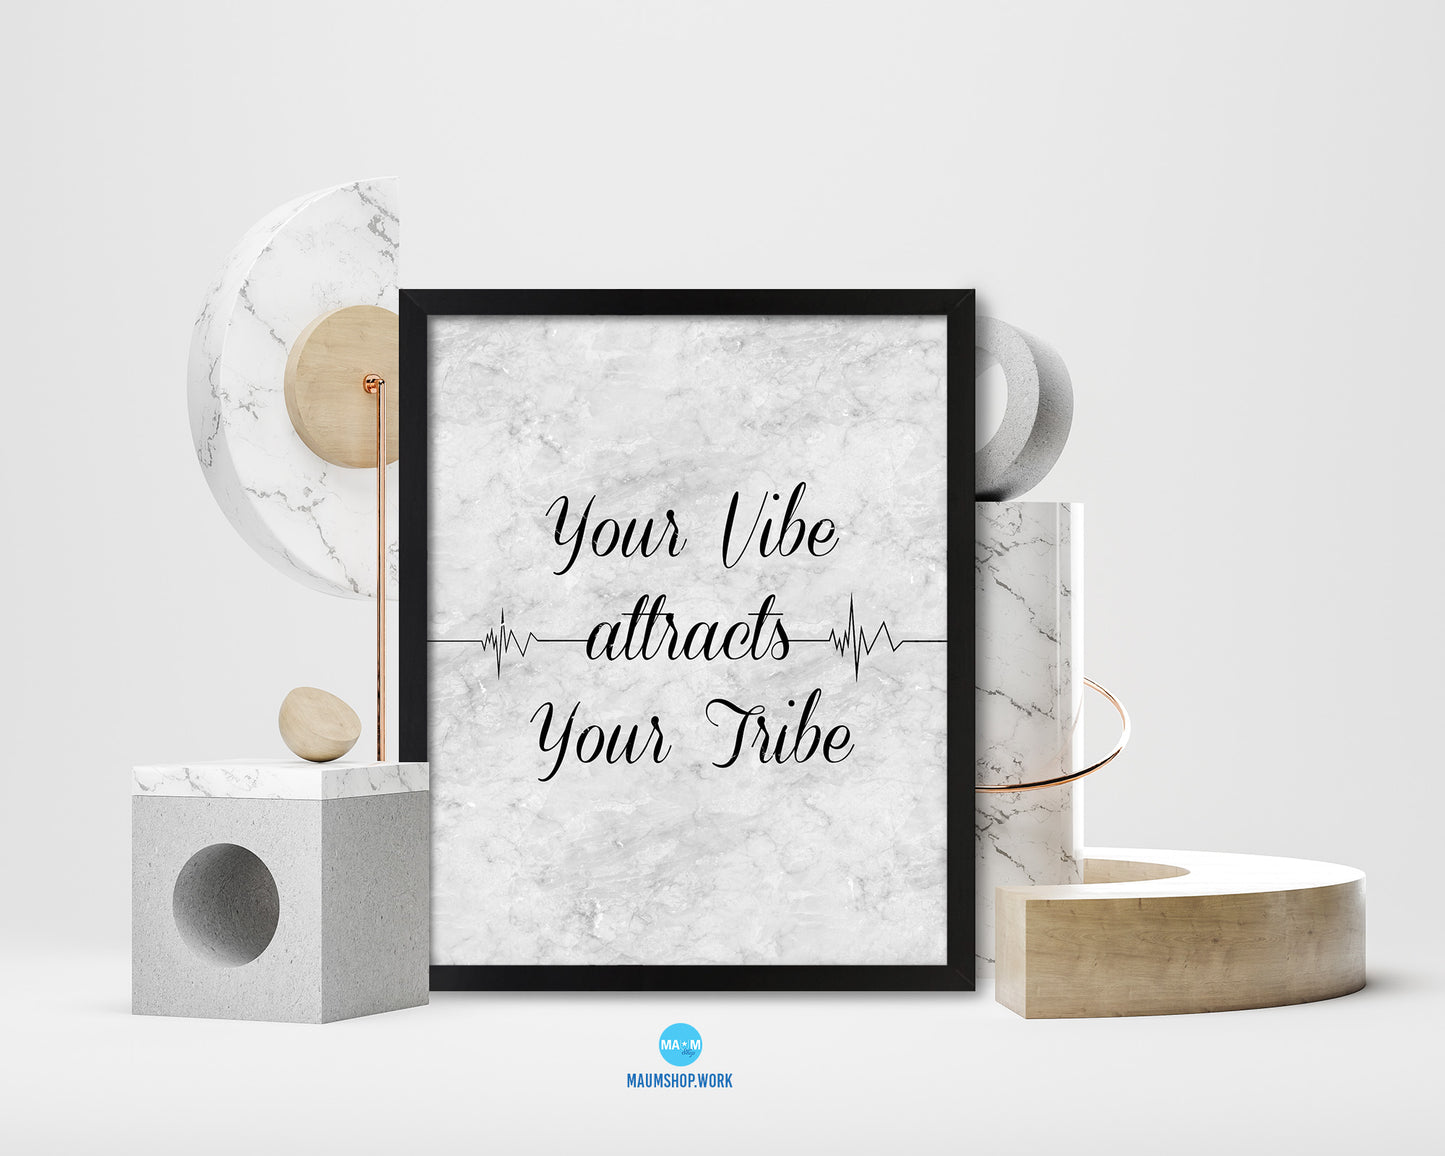 Your vibe attracts your tribe Quote Framed Print Wall Art Decor Gifts